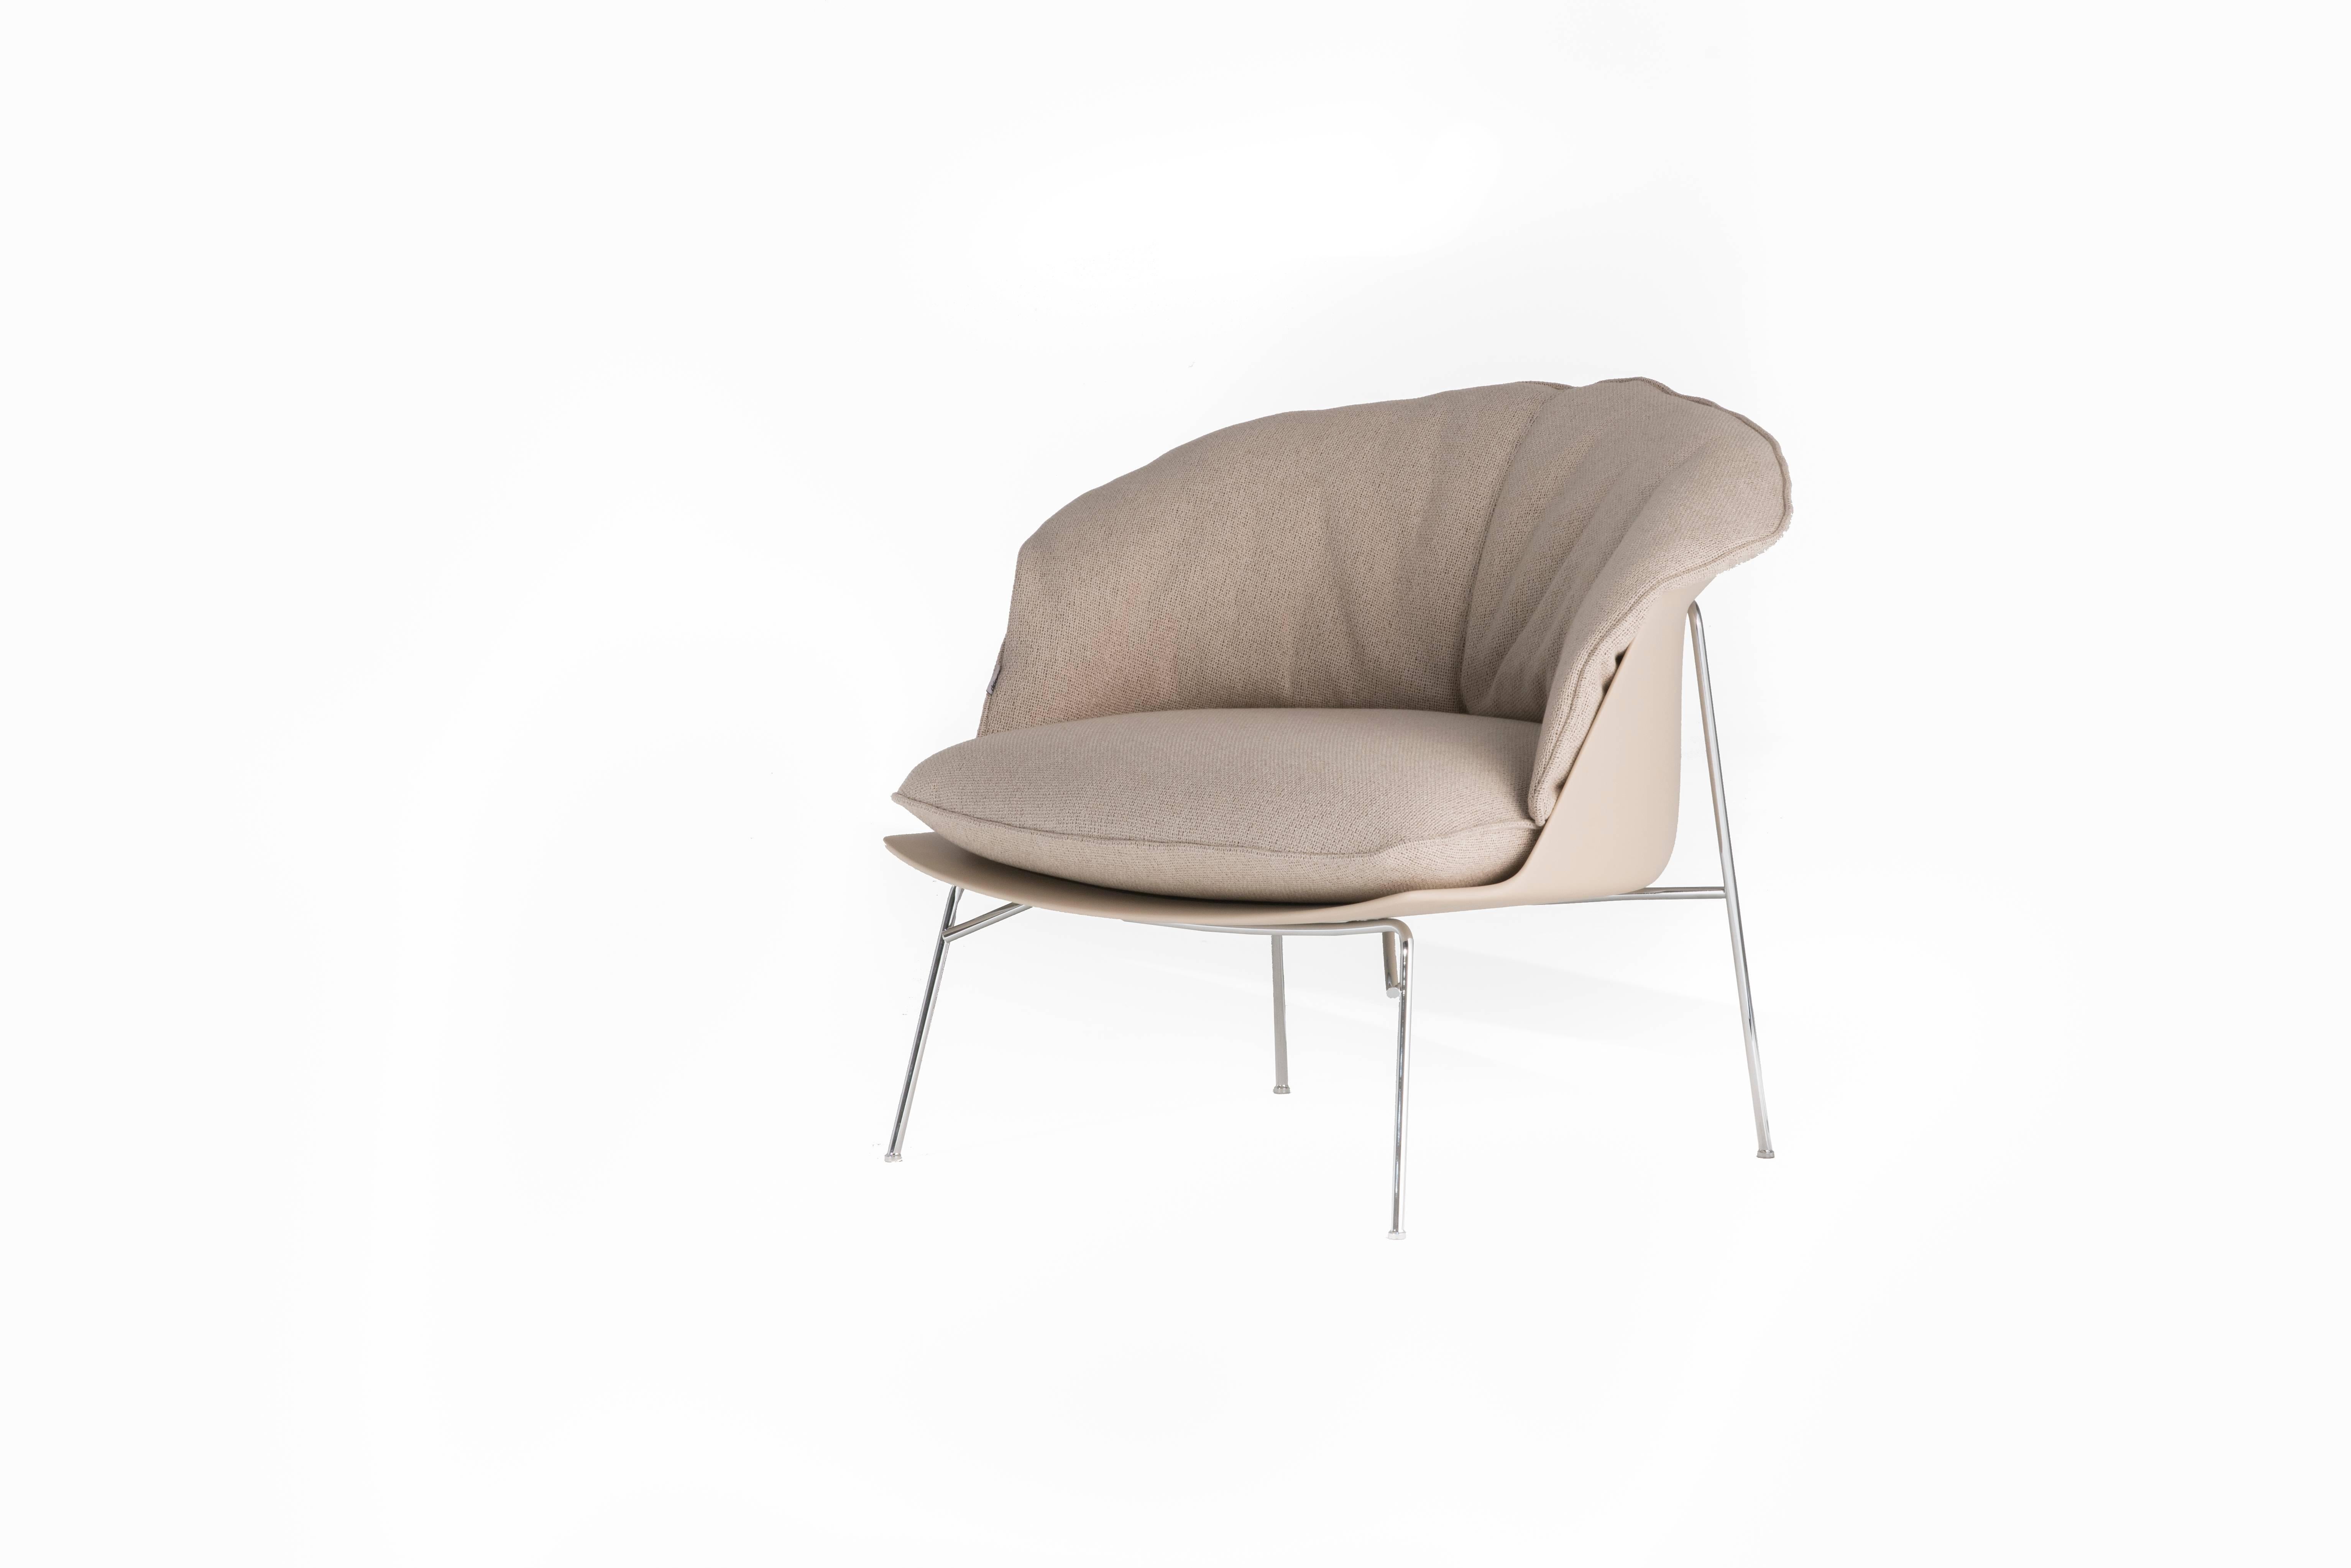 The lacquered shell of the Moon and FullMoon chaise longue sits on a very light metal frame and comfortably pampers your body in a subtle, seductive interplay of amazement and understated iconic beauty.

Ludovica & Roberto Palomba, architects and